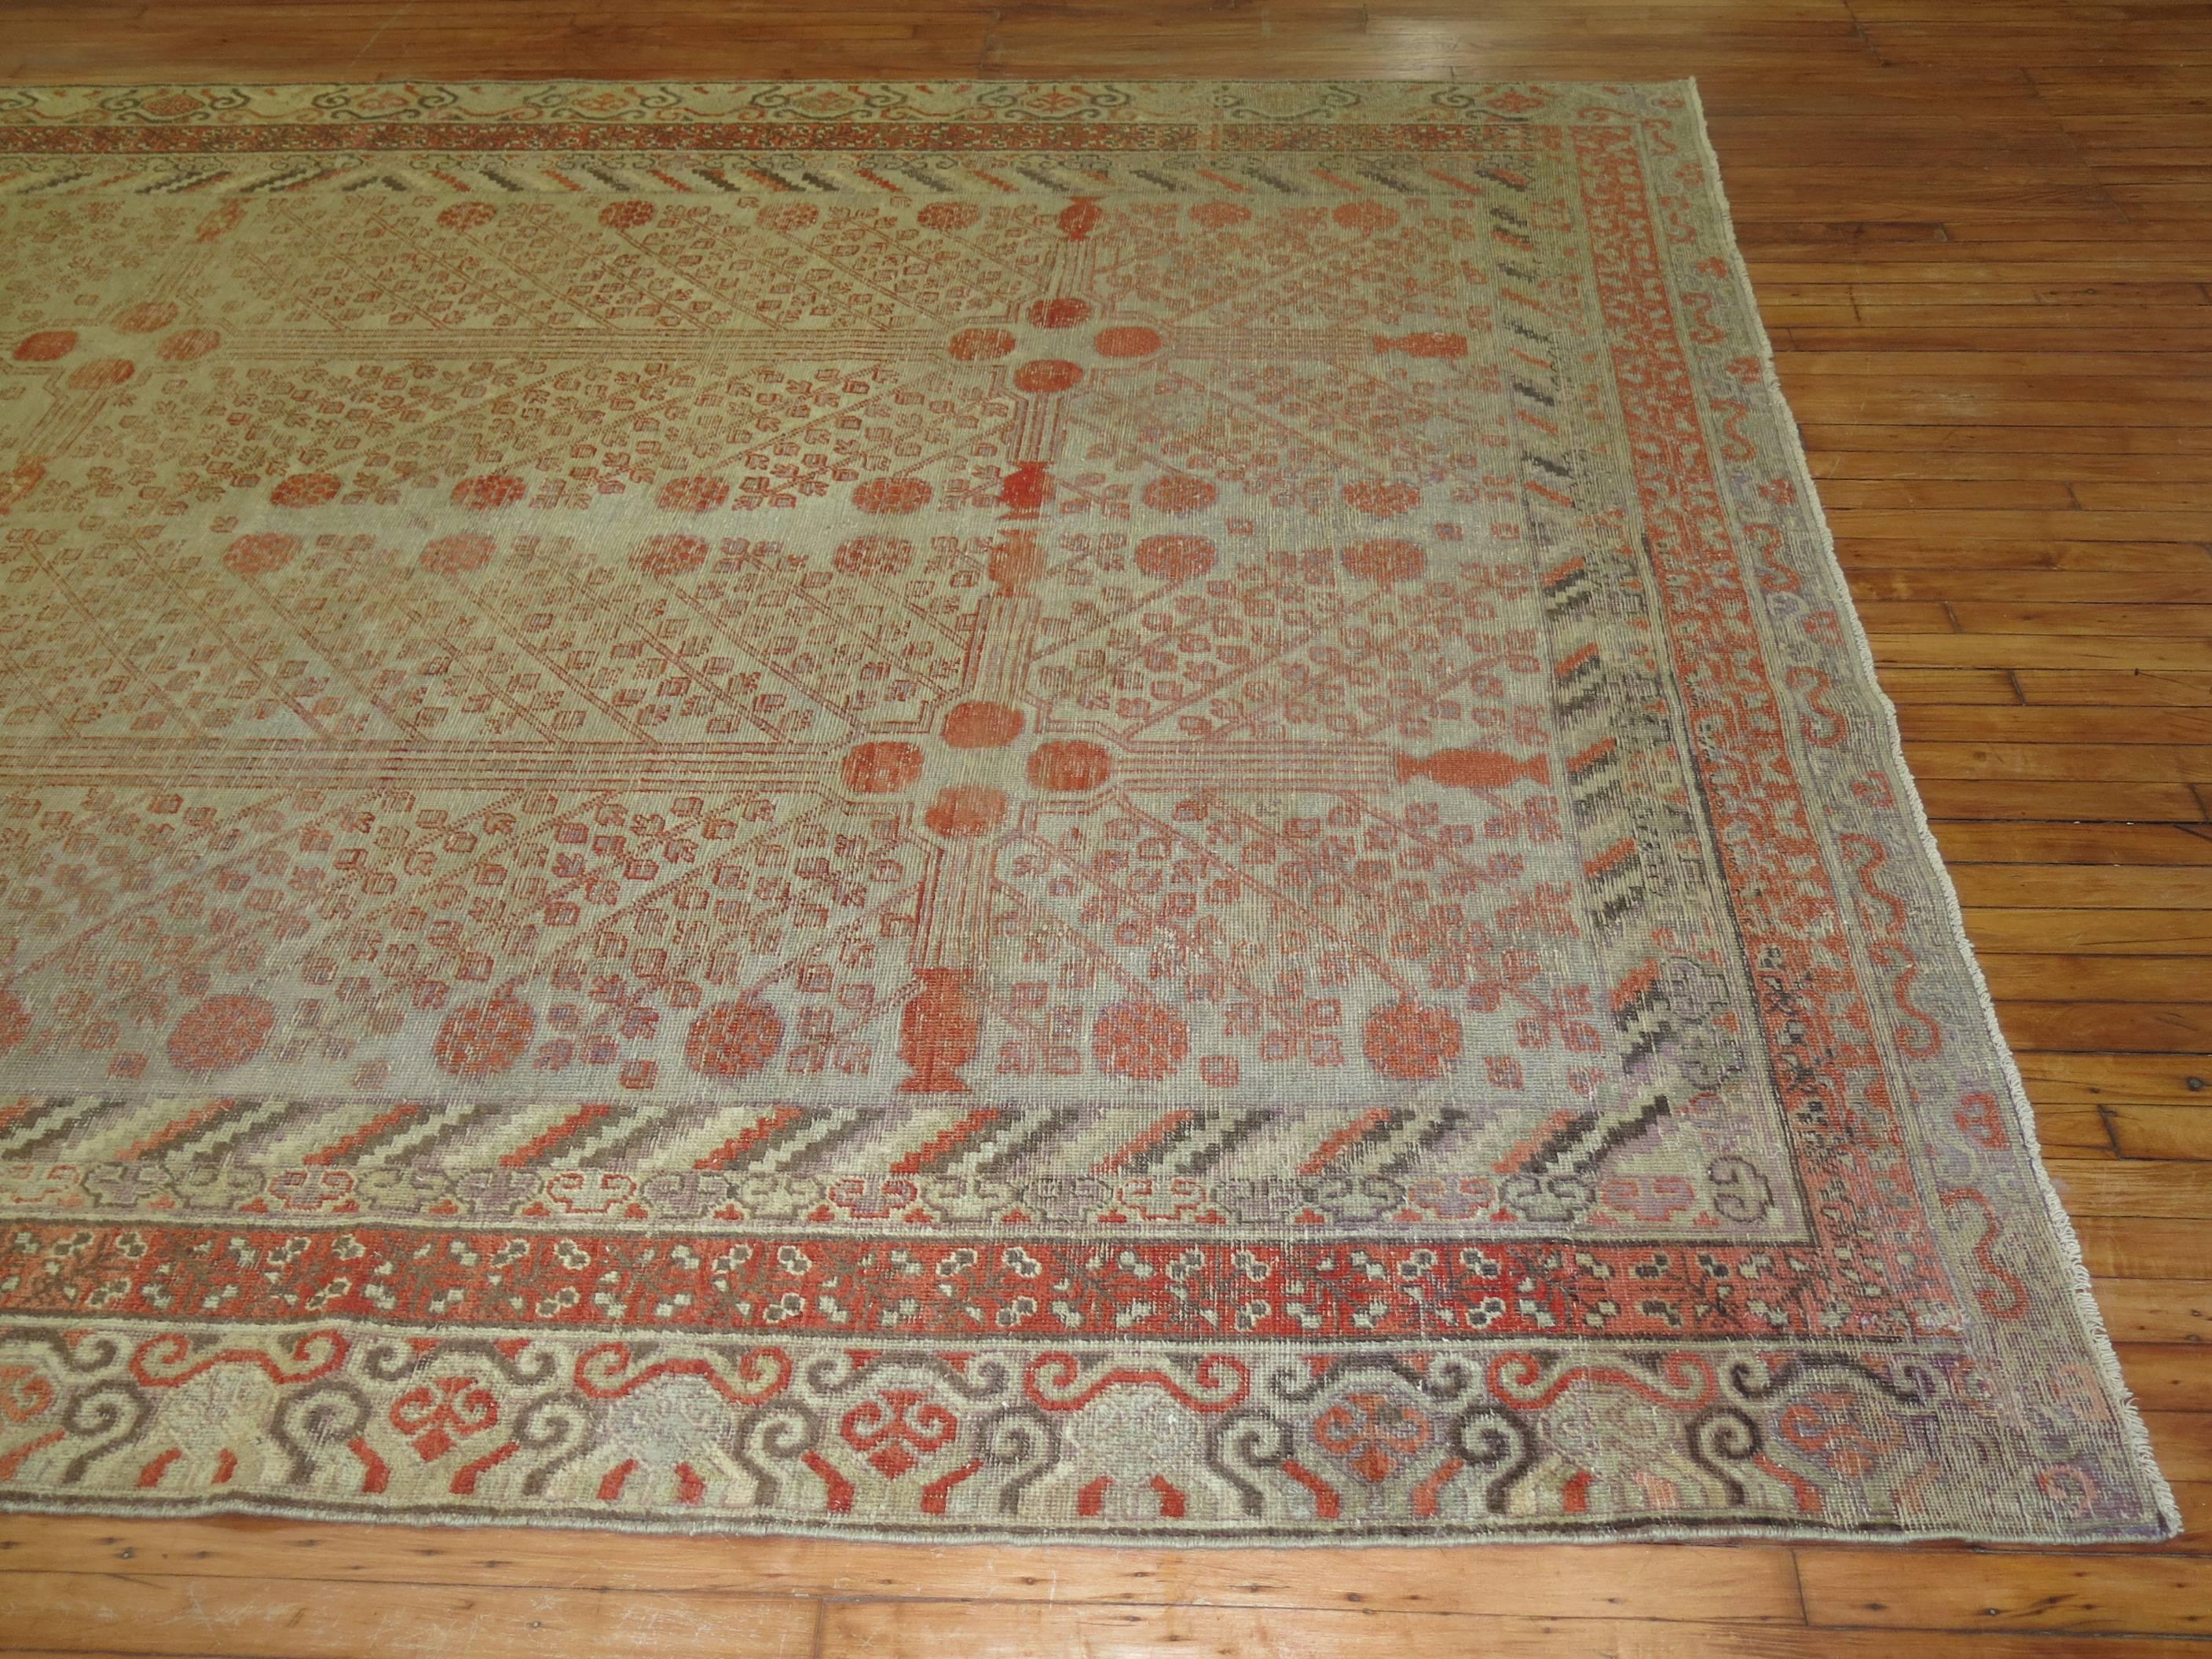 Rare size antique Khotan rug with shabby chic appeal. The field is gray, accents in soft red and brown. The pomegranate design is infamous from this region,

circa 1880. Measures: 8'1